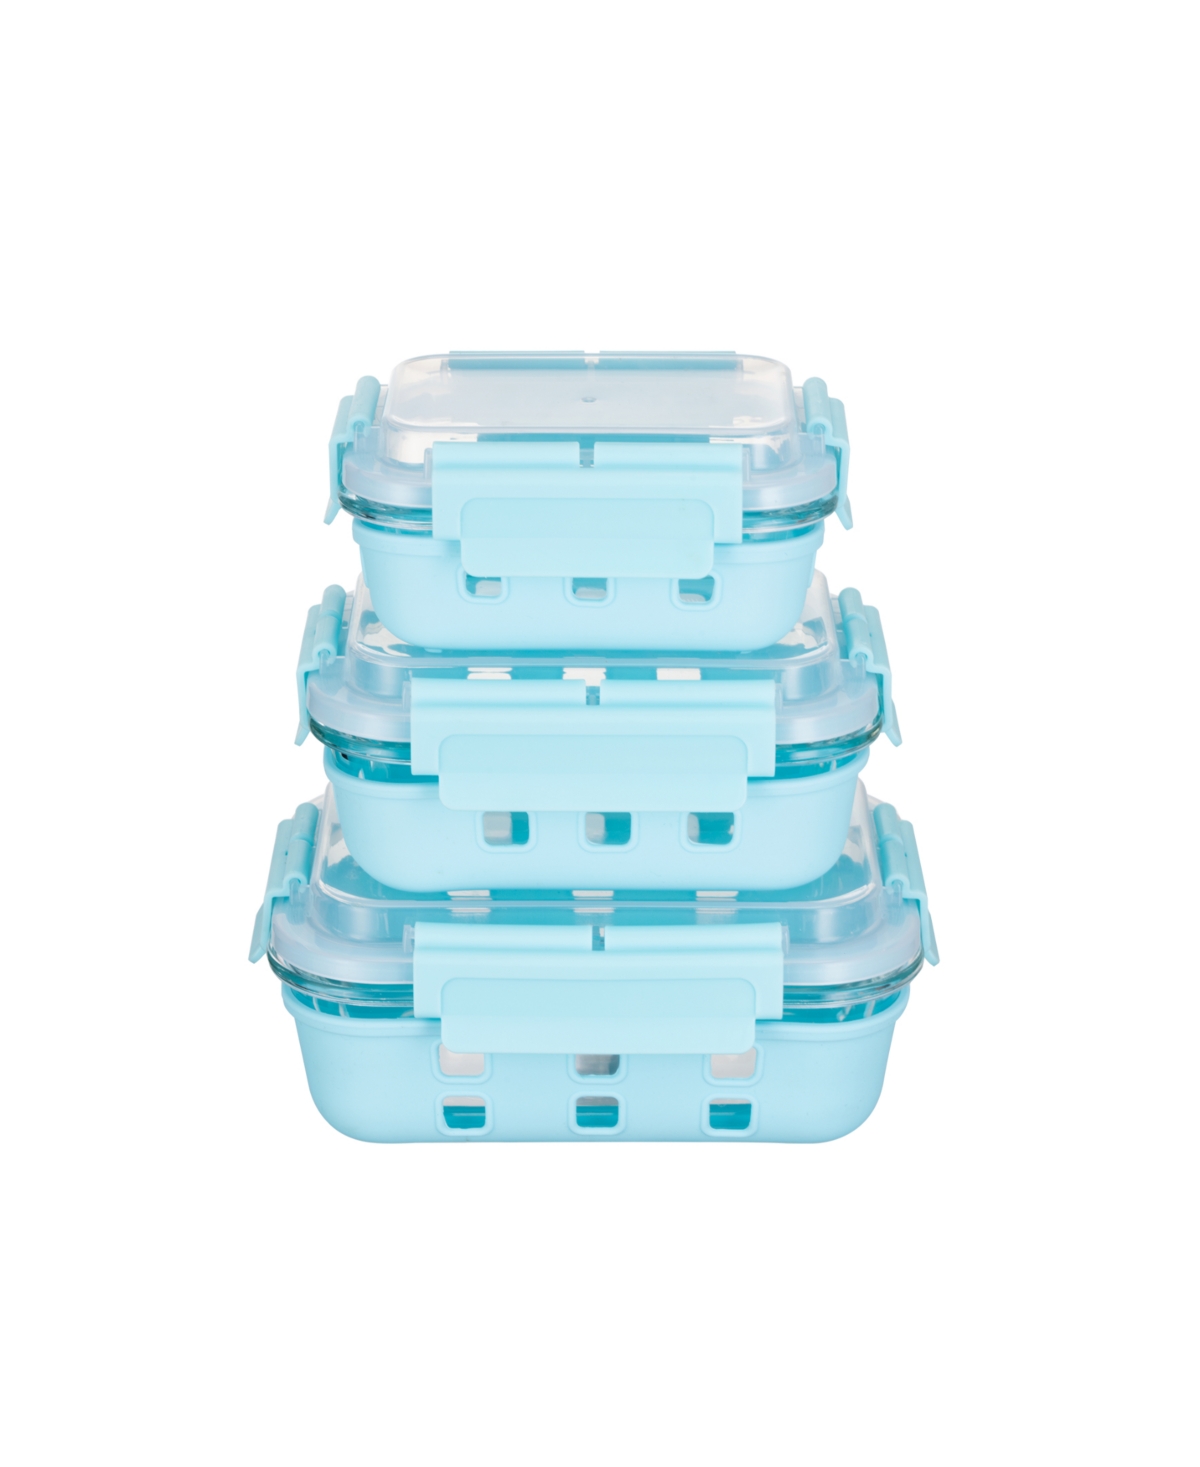 Genicook 3 Pc Rectangular Container Hi-top Lids With Pro Grade Removable Lockdown Levers Silicone Sleeve Set In Aqua Blue